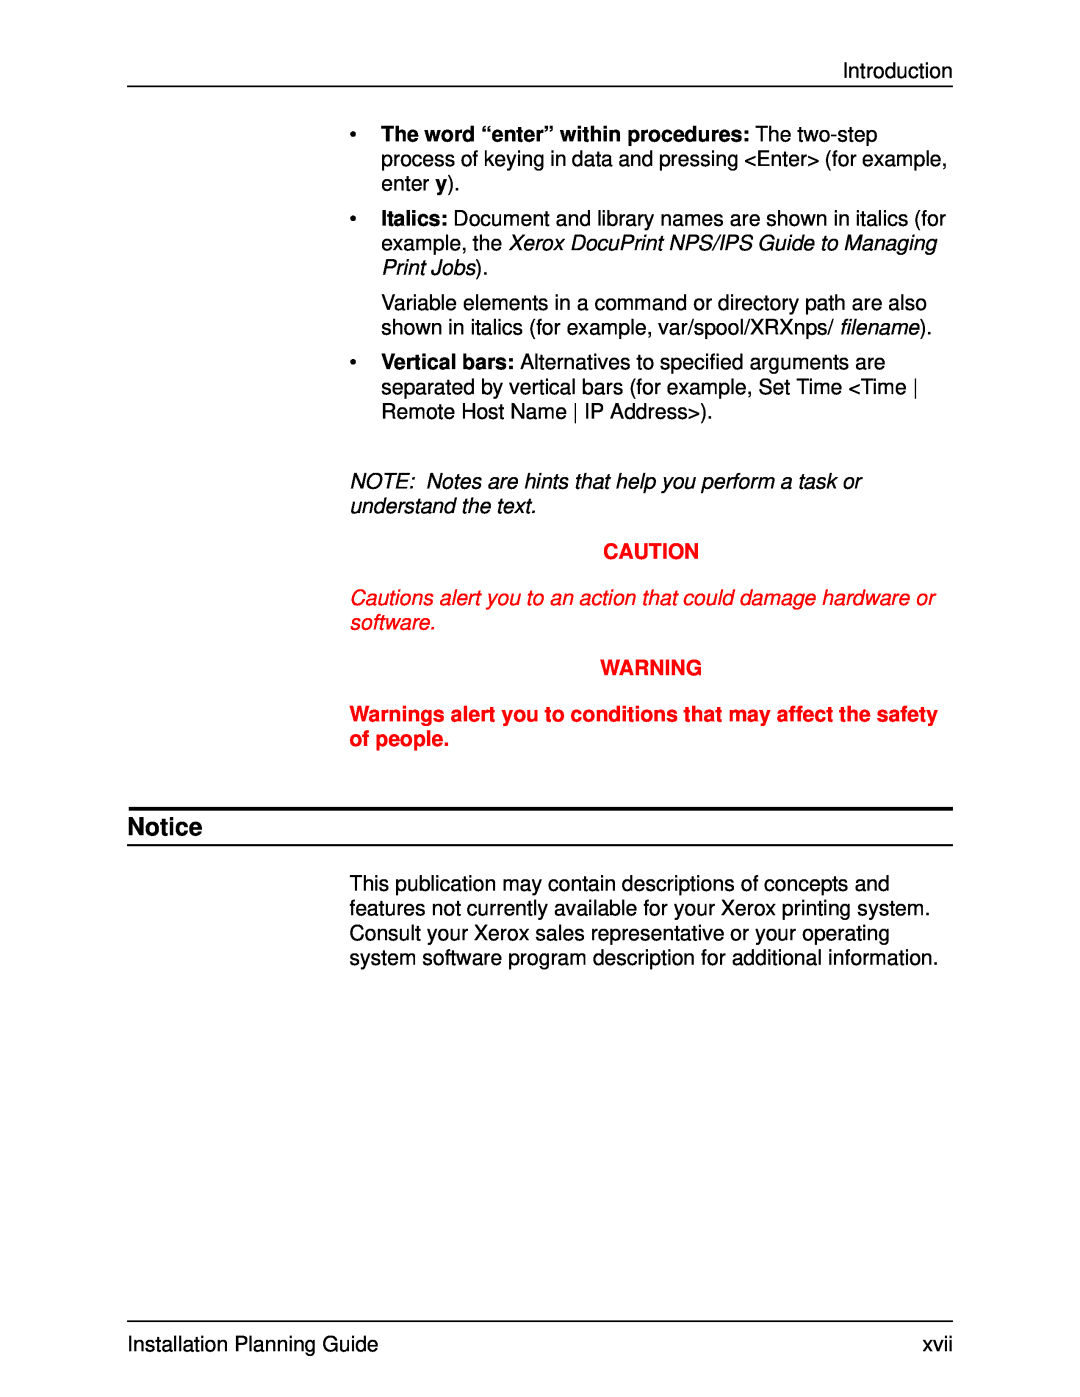 Xerox 155, 100, 135, 115 manual Warnings alert you to conditions that may affect the safety of people 